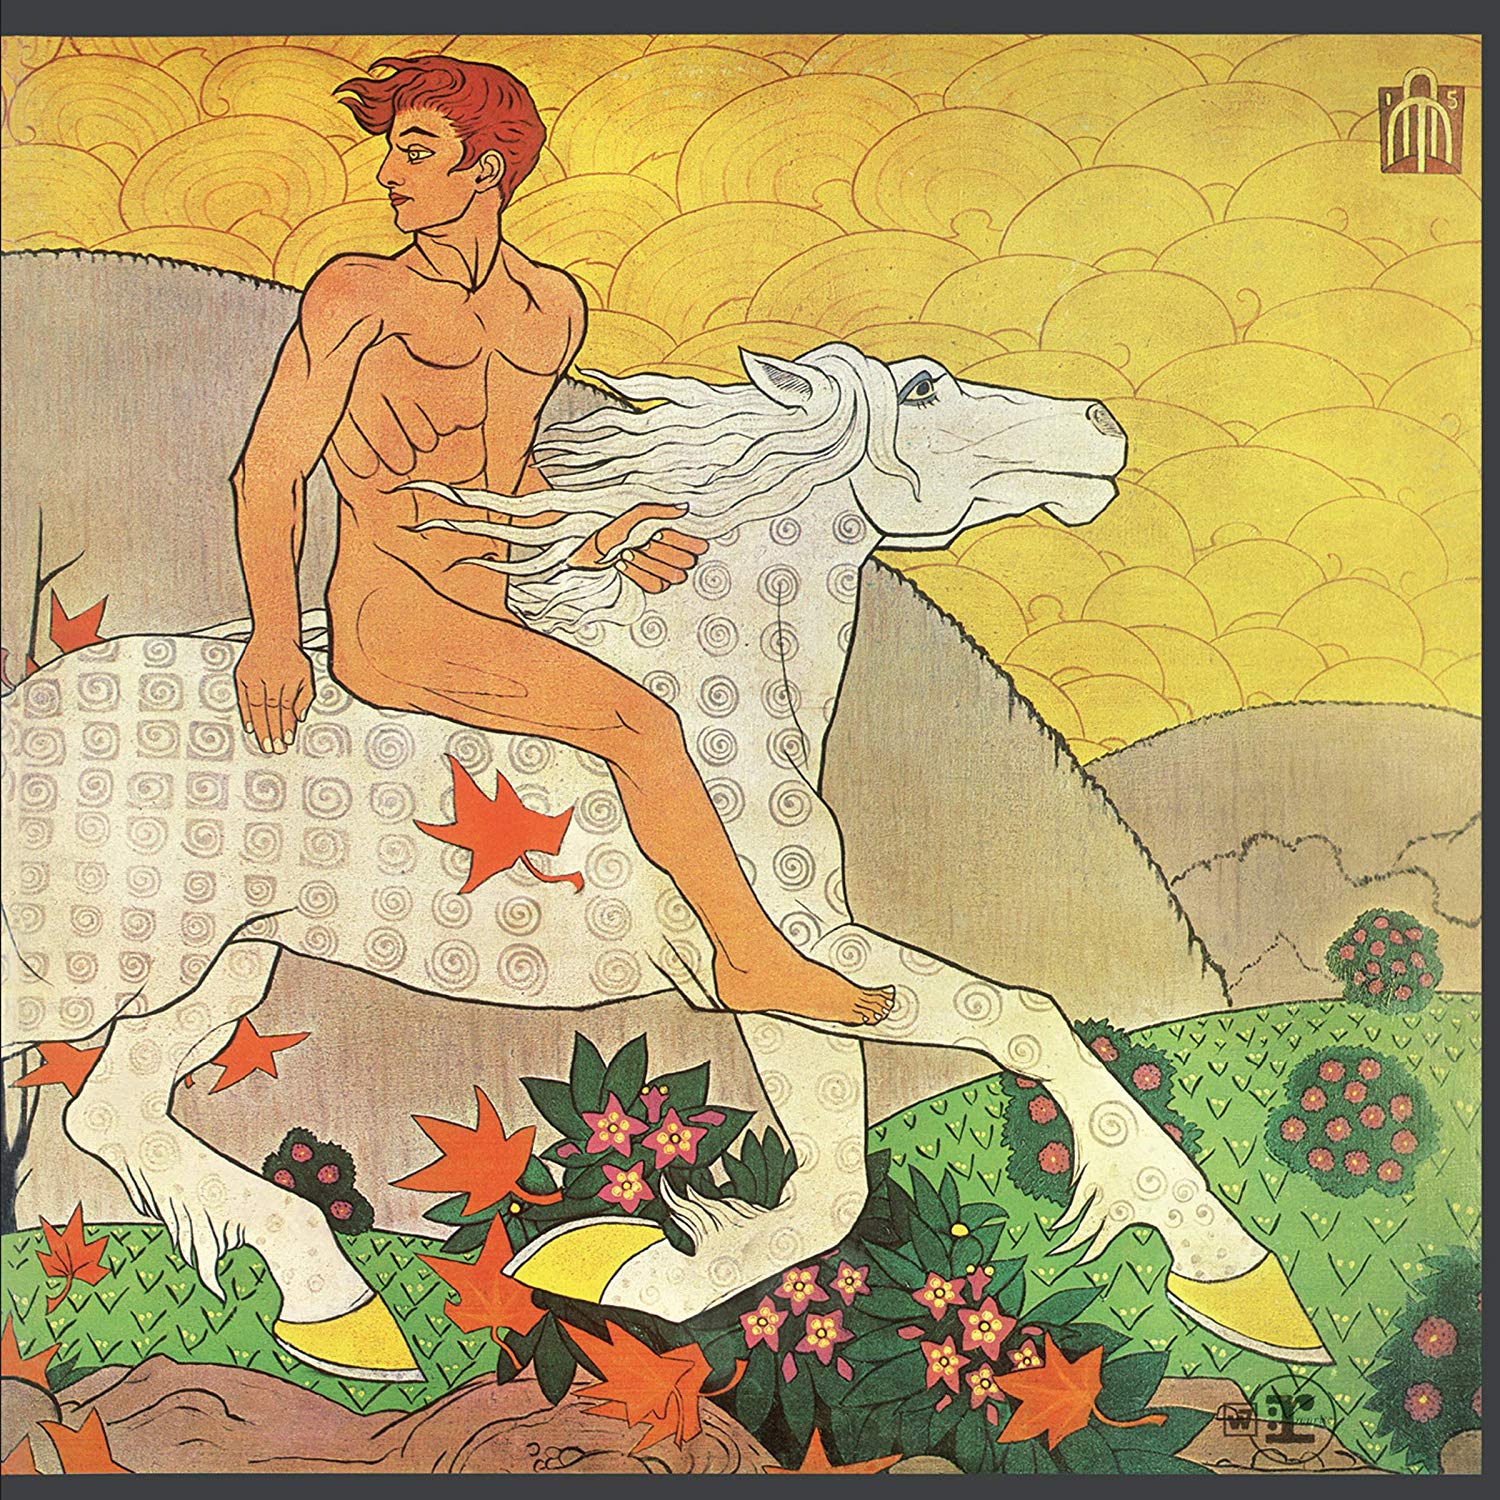 Fleetwood Mac – Then Play On (Expanded Edition / Remastered) (1969/2013/2018) [Official Digital Download 24bit/96kHz]